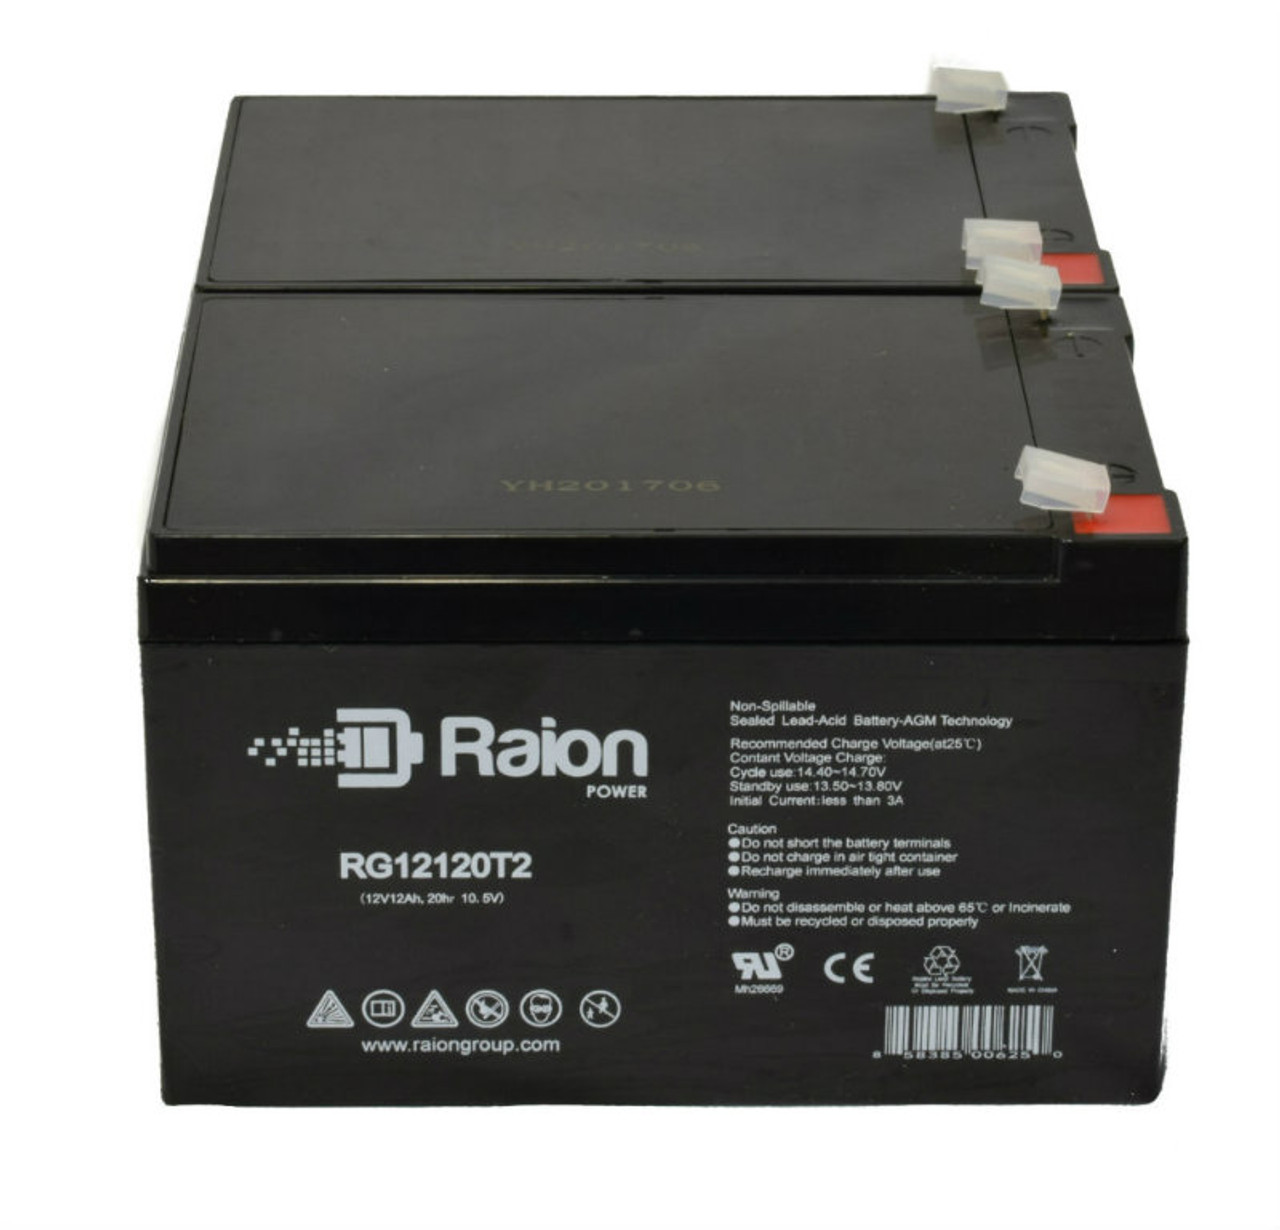 Raion Power 12V 12Ah Non-Spillable Compatible Replacement Battery for BPOWER BPL 12-12 - (2 Pack)